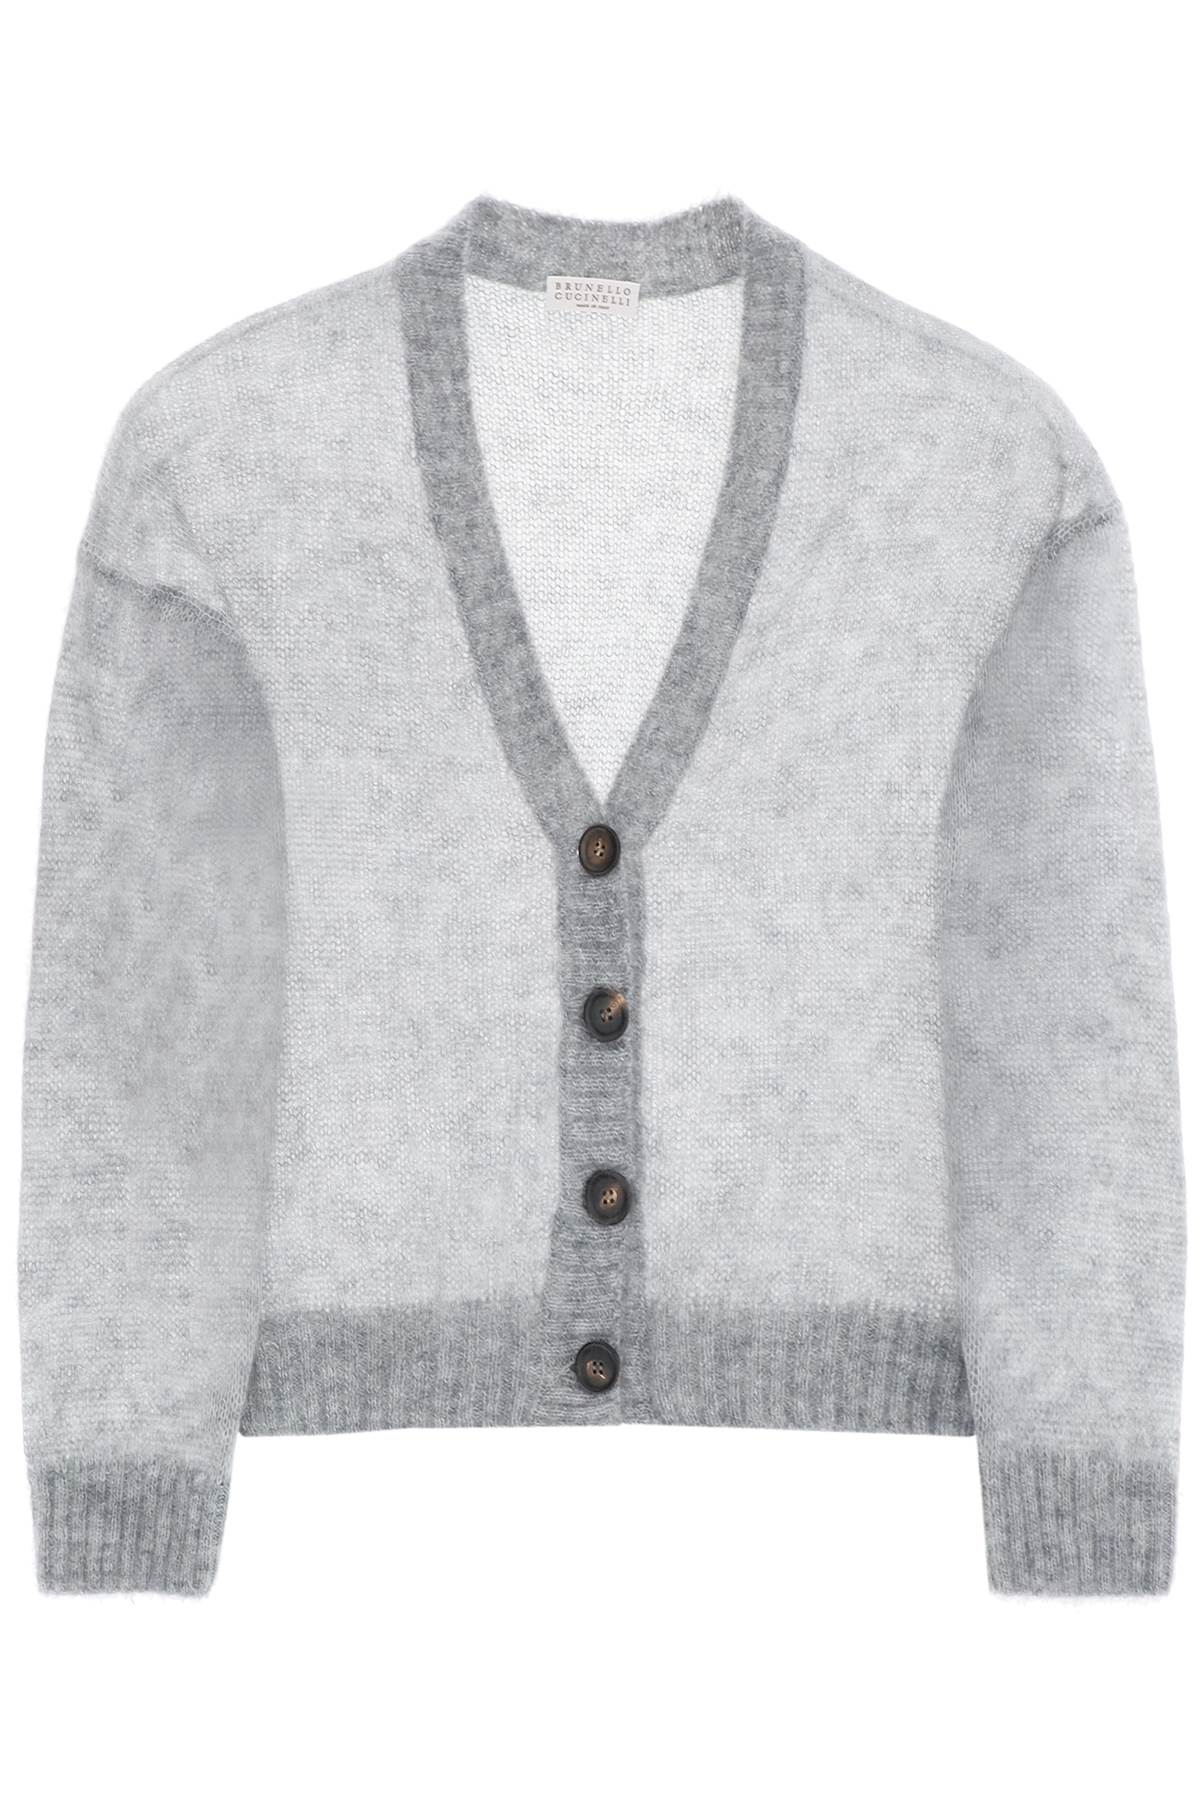 Brunello cucinelli short wool and mohair cardigan-0